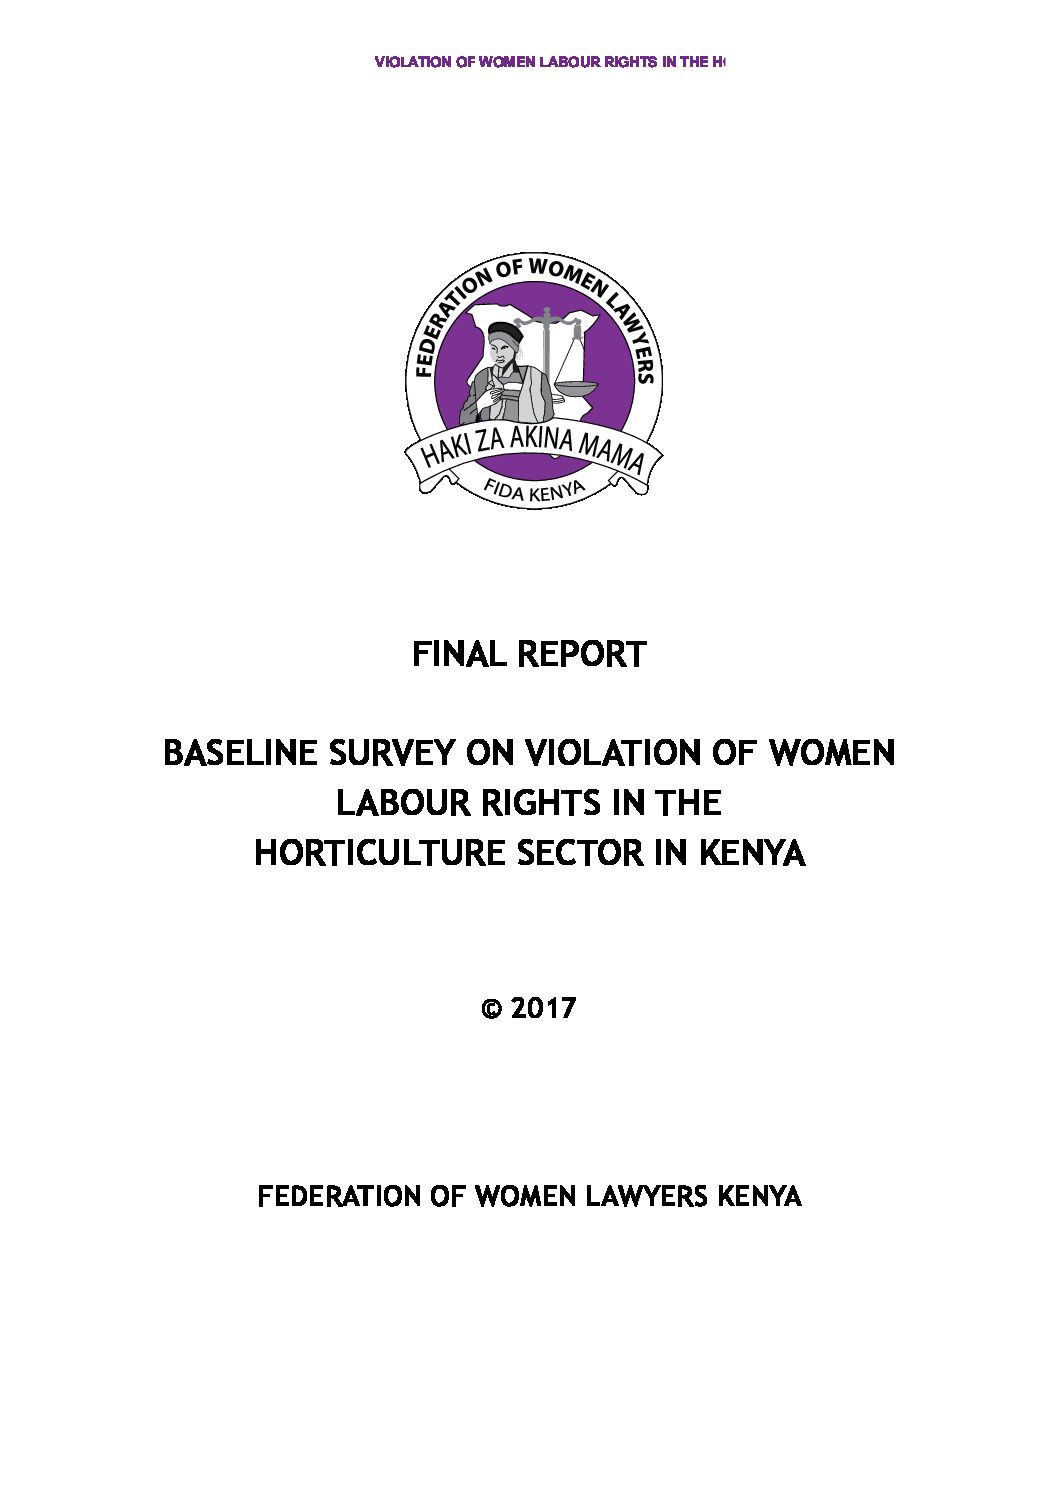 Baseline survey on violation of women labour rights in the horticulture sector in Kenya